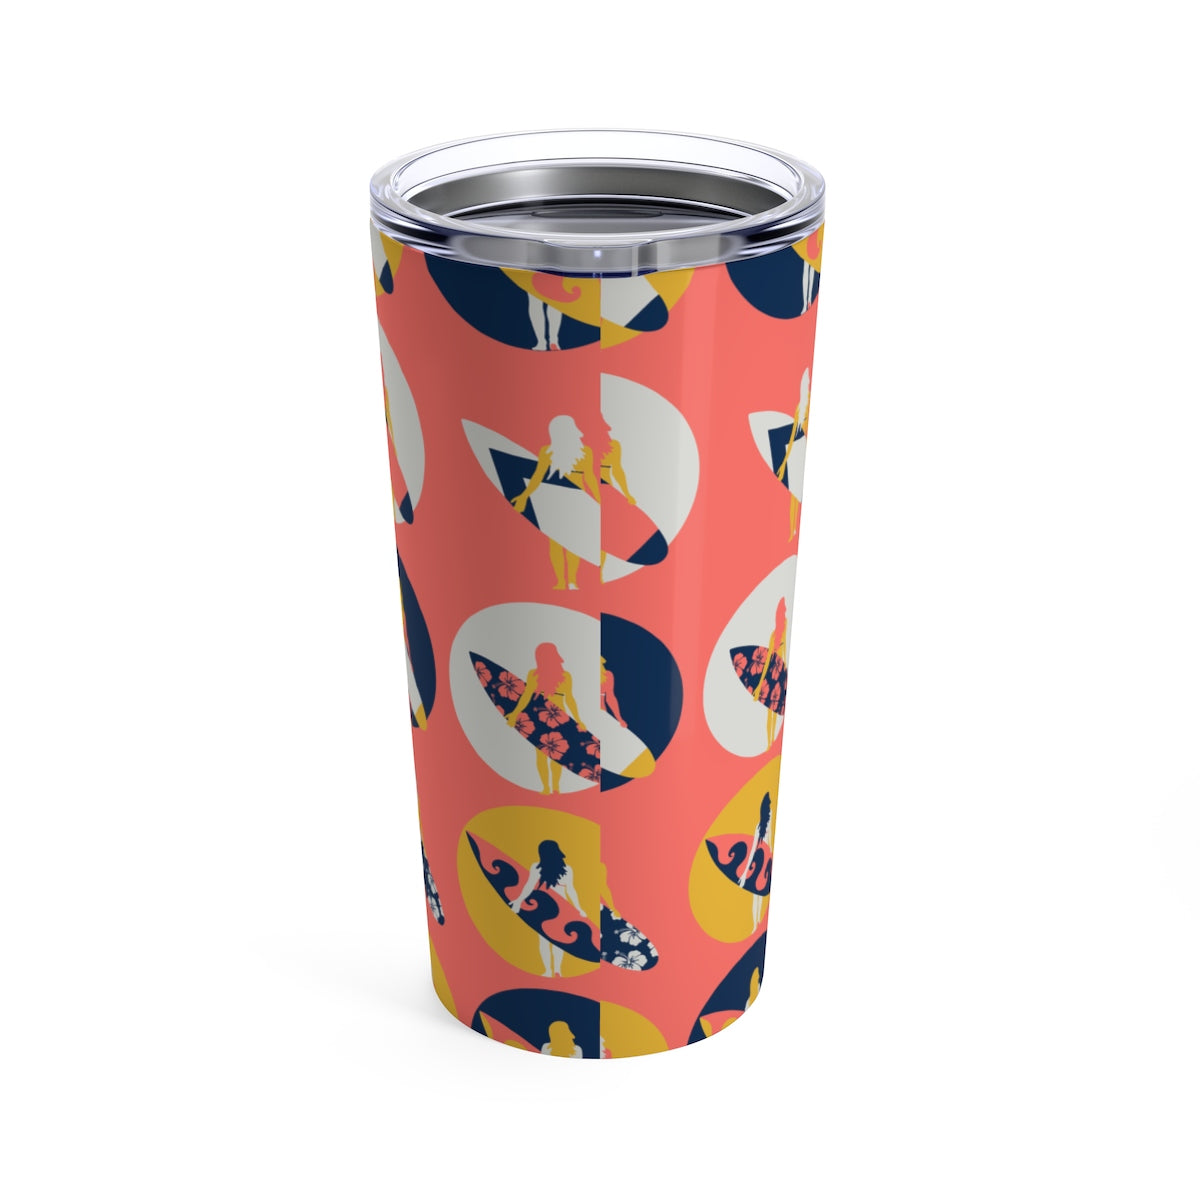 Find Your Coast 20 oz Stainless Steel Surfer Girl Art Stainless Steel Tumbler FIND YOUR COAST  CO